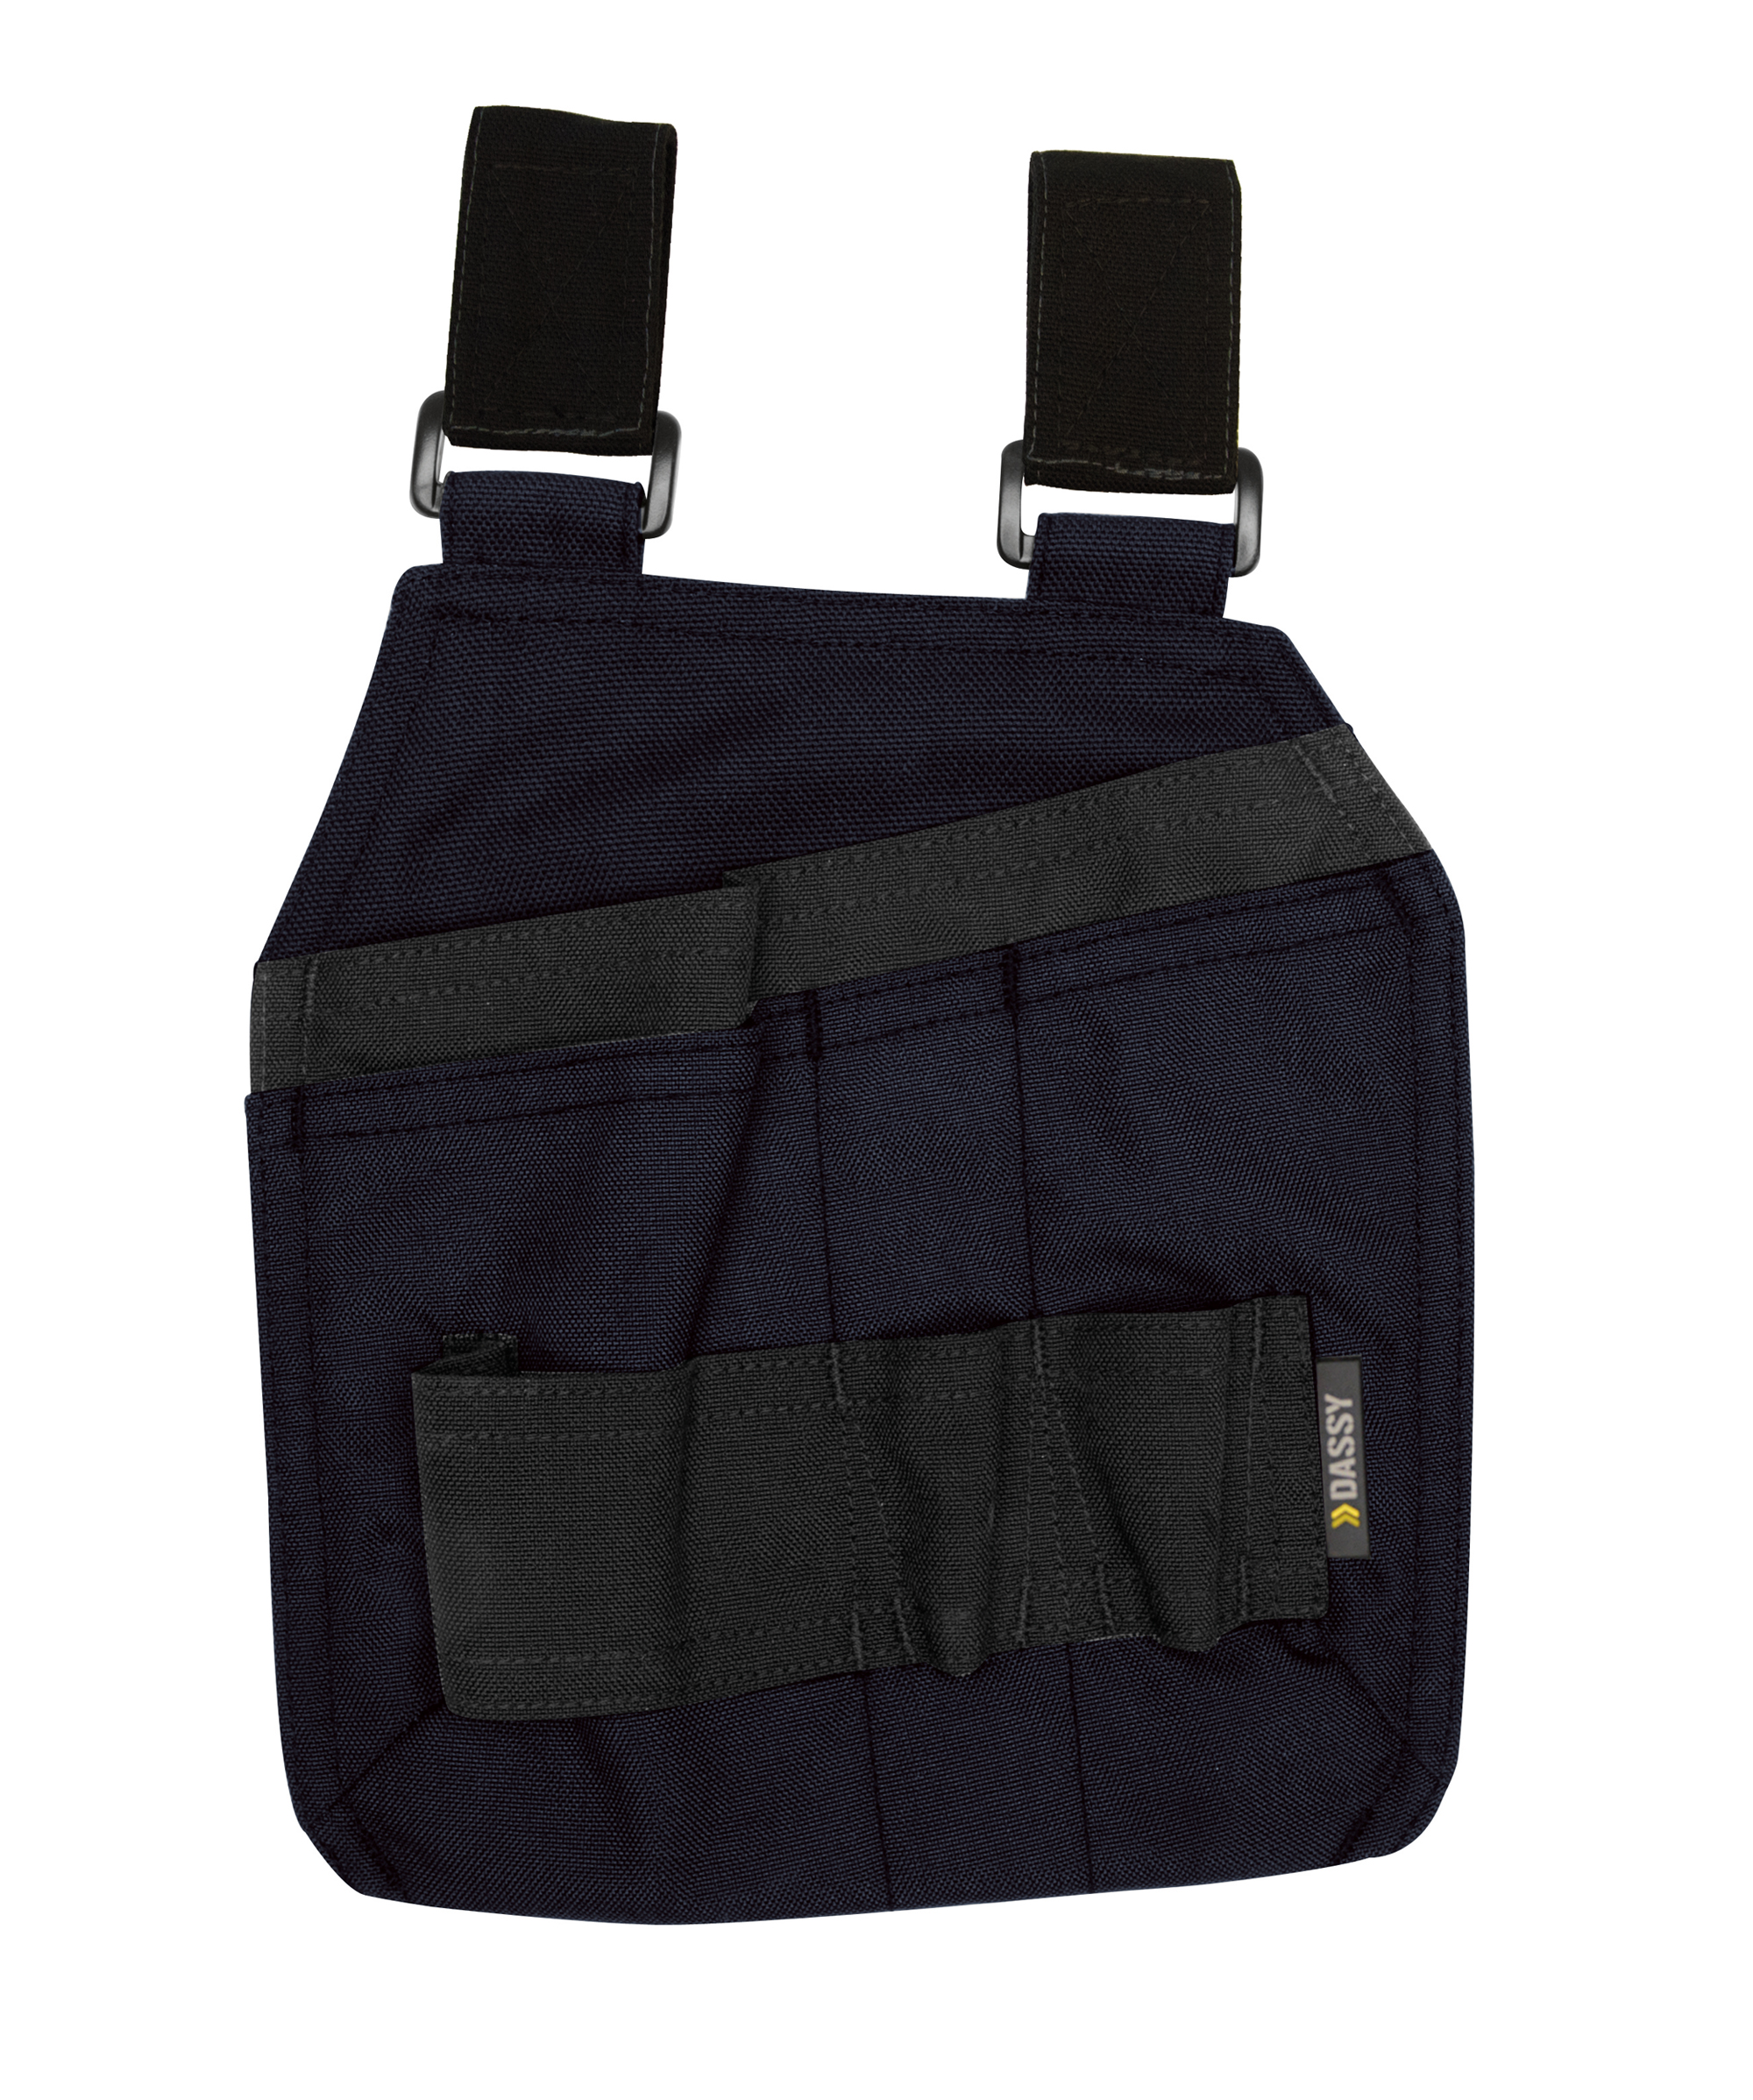 gordon-with-loops_canvas-tool-pouches-(by-pair)-with-velcro-loops_midnight-blue-black_front.jpg